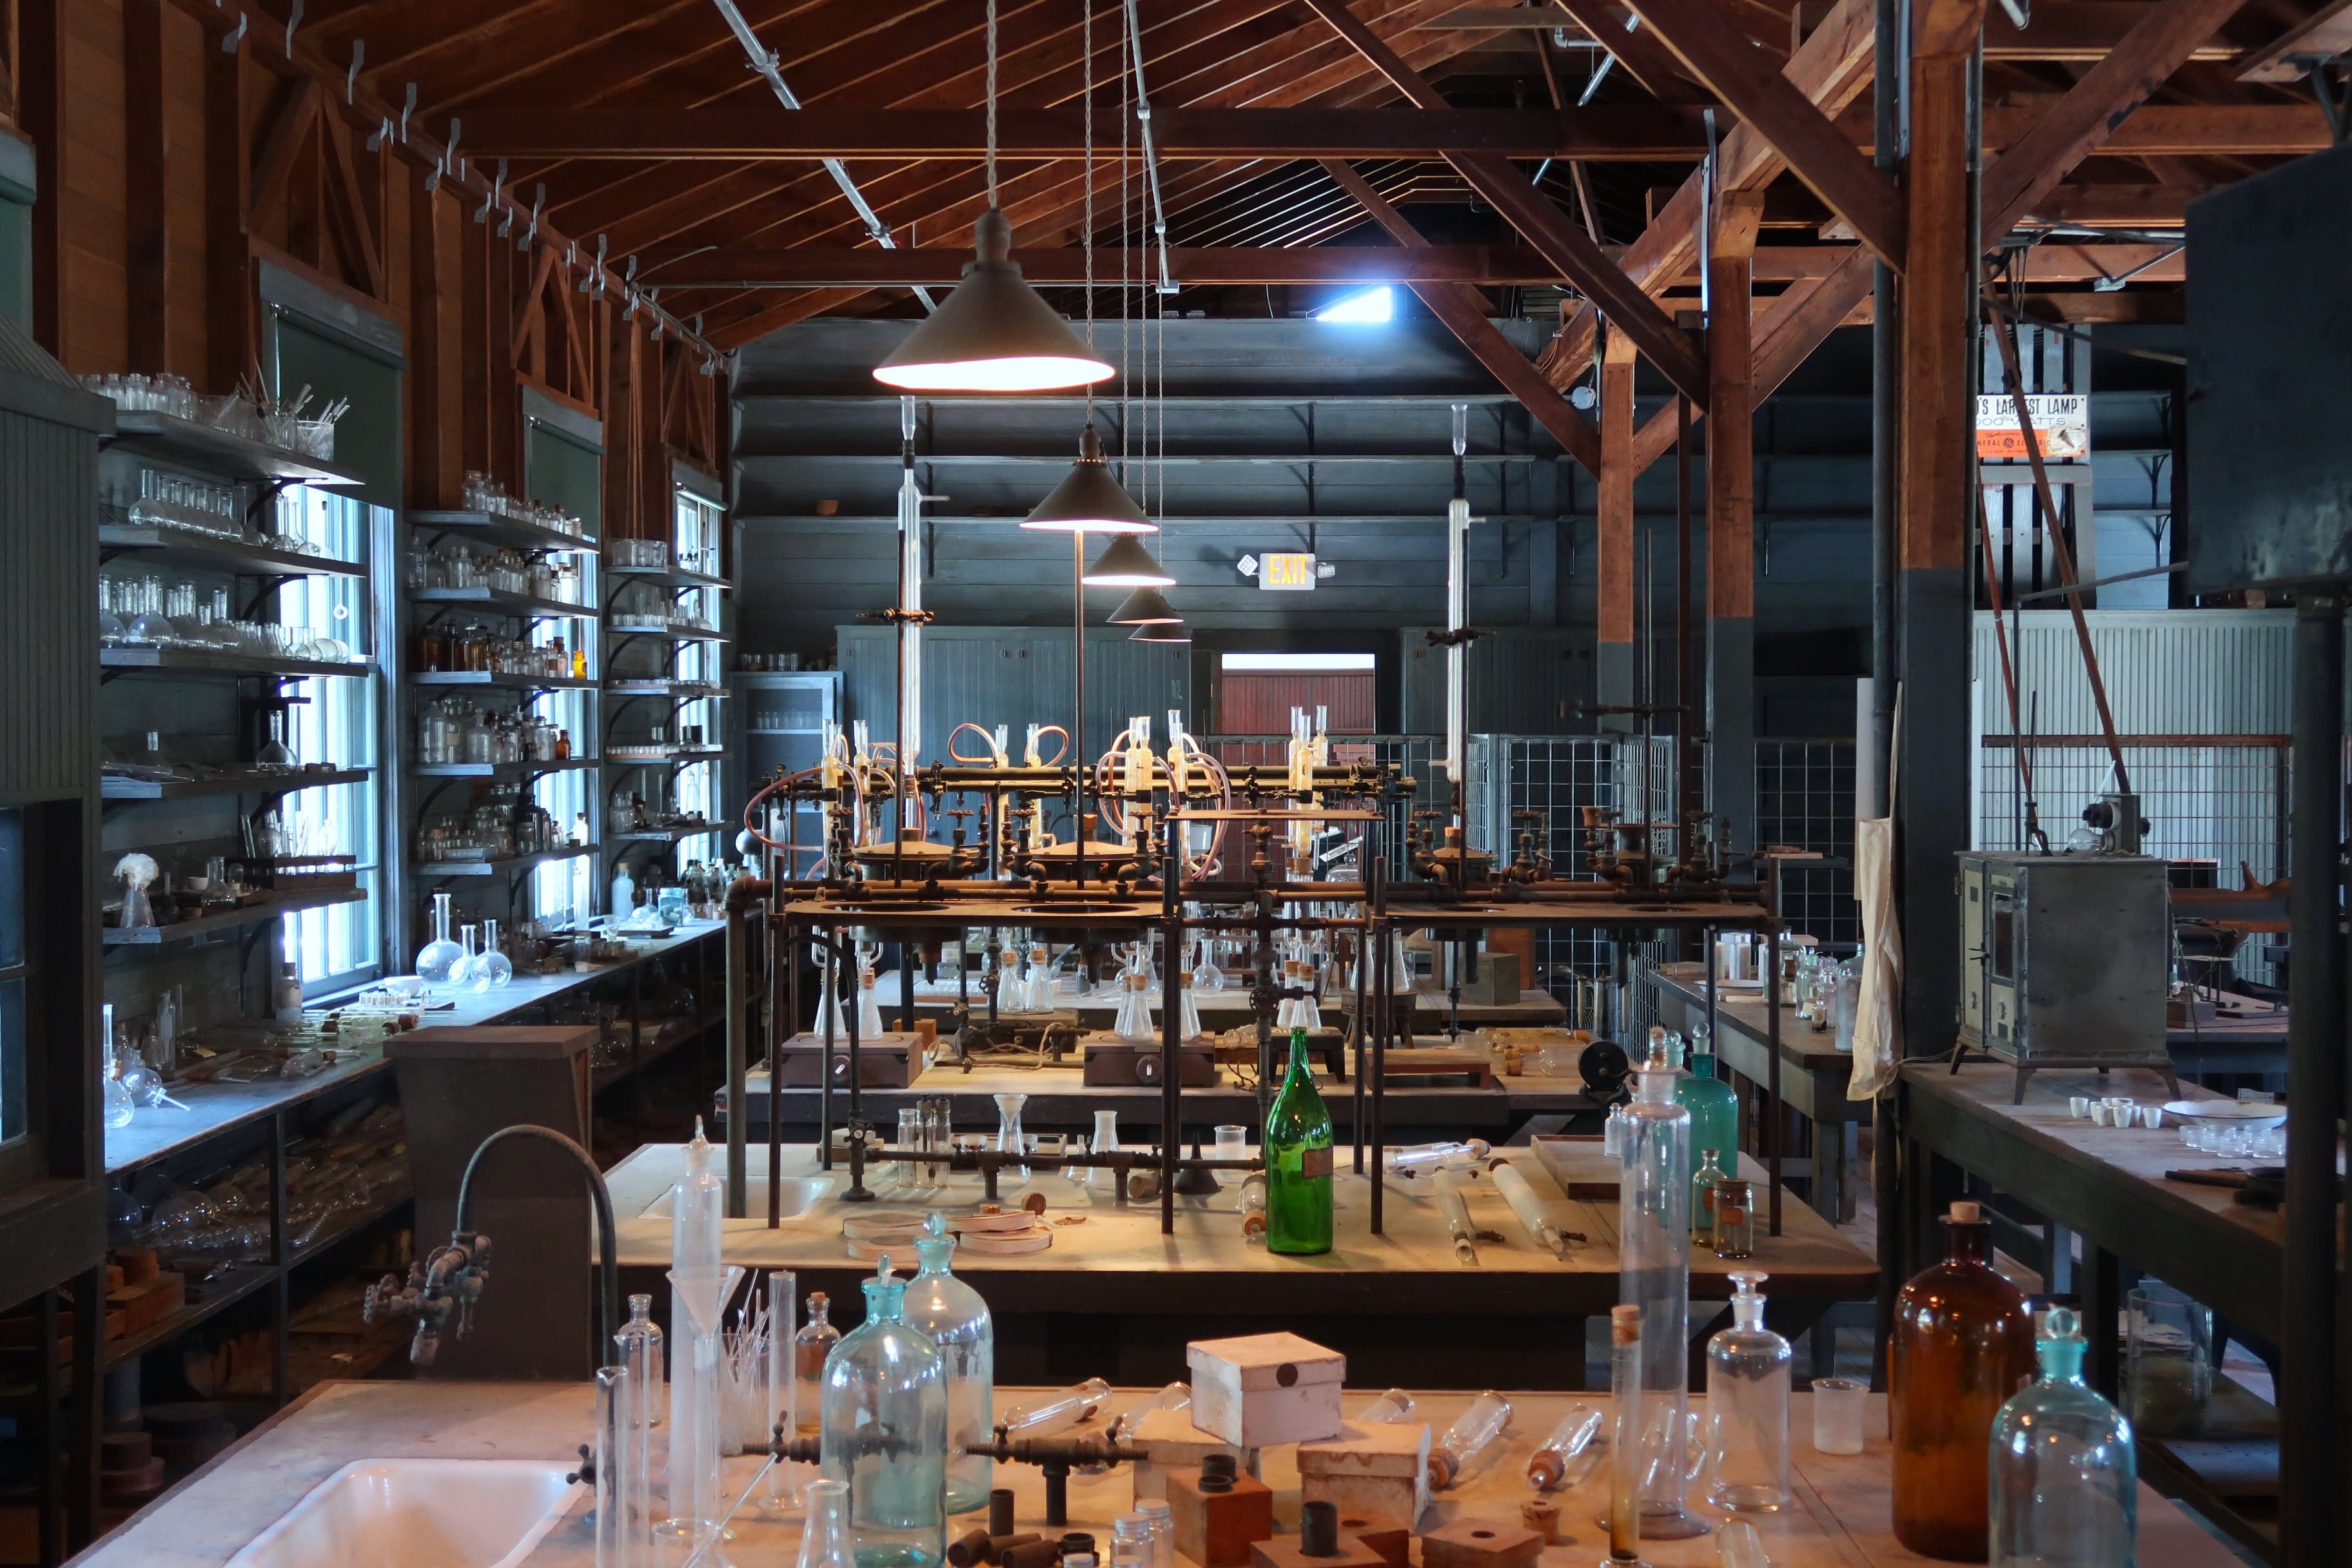 This laboratory contains equipment used by Thomas Edison. It is part of the Edison and Ford Winter estate. He used the laboratory to find the best rubber plant.